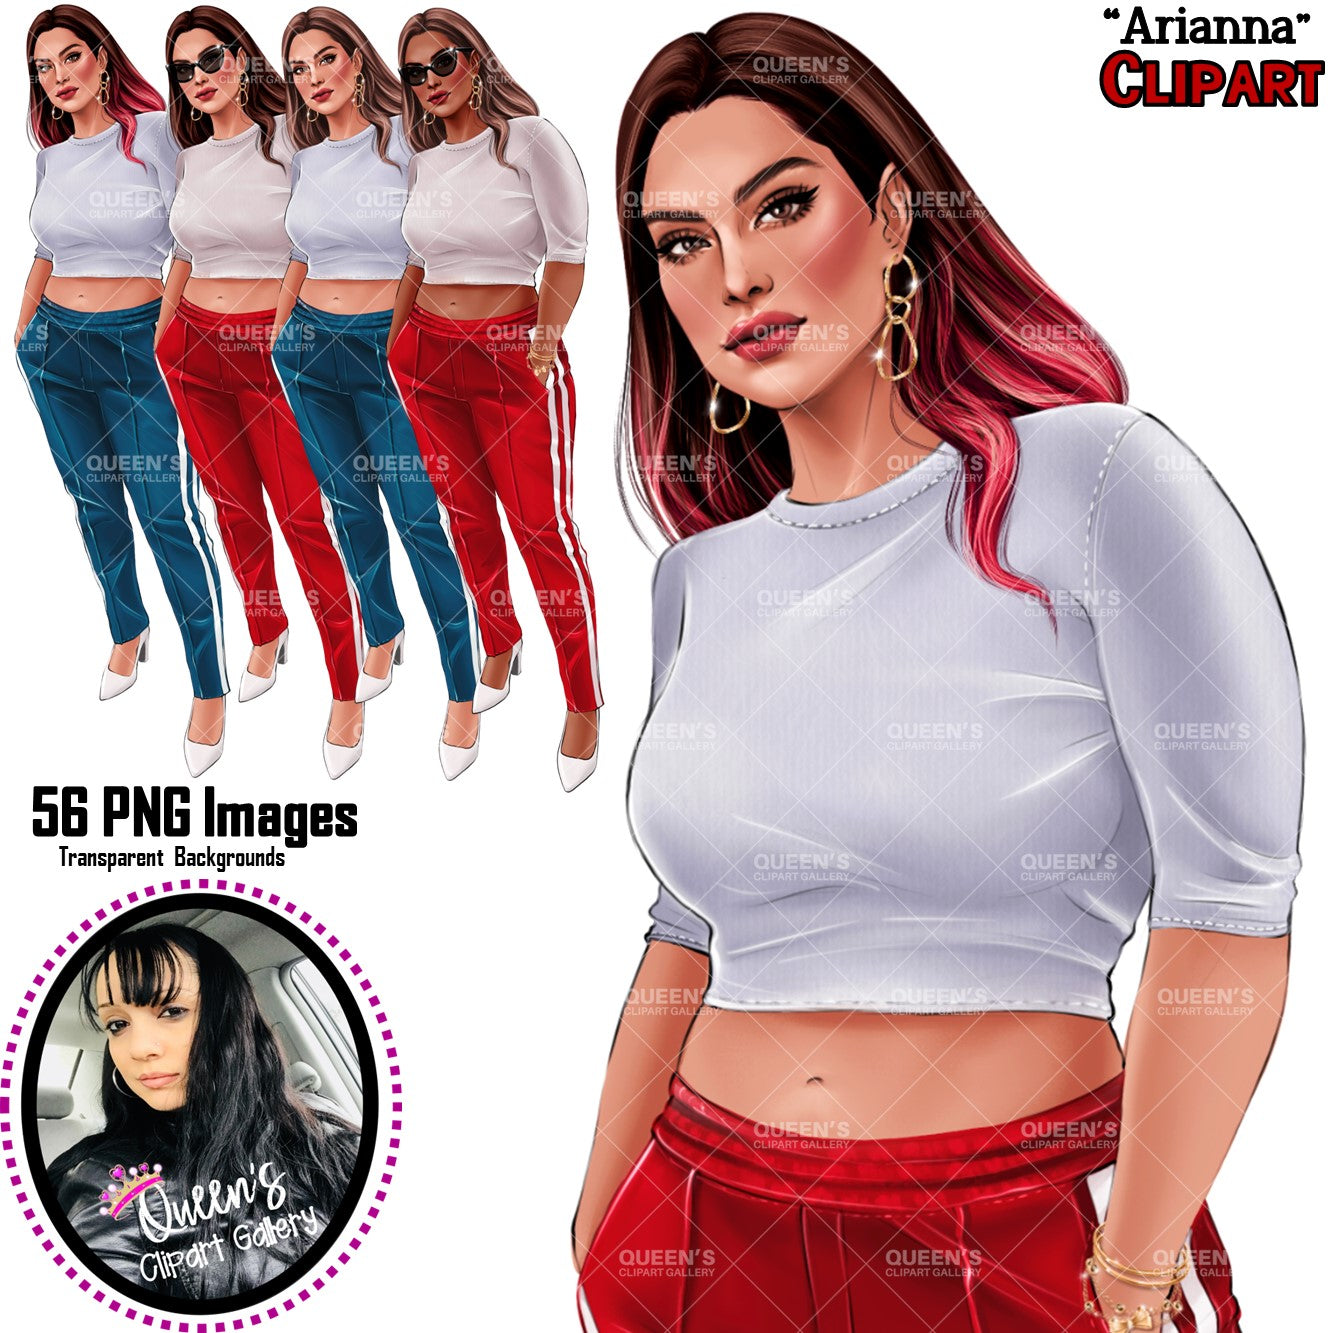 Gym Casual, Sporty girl clipart, Boss girl, Fashion girl clipart, Fashion illustration clipart, Curvy girl, Curvy woman png, Fitness Png